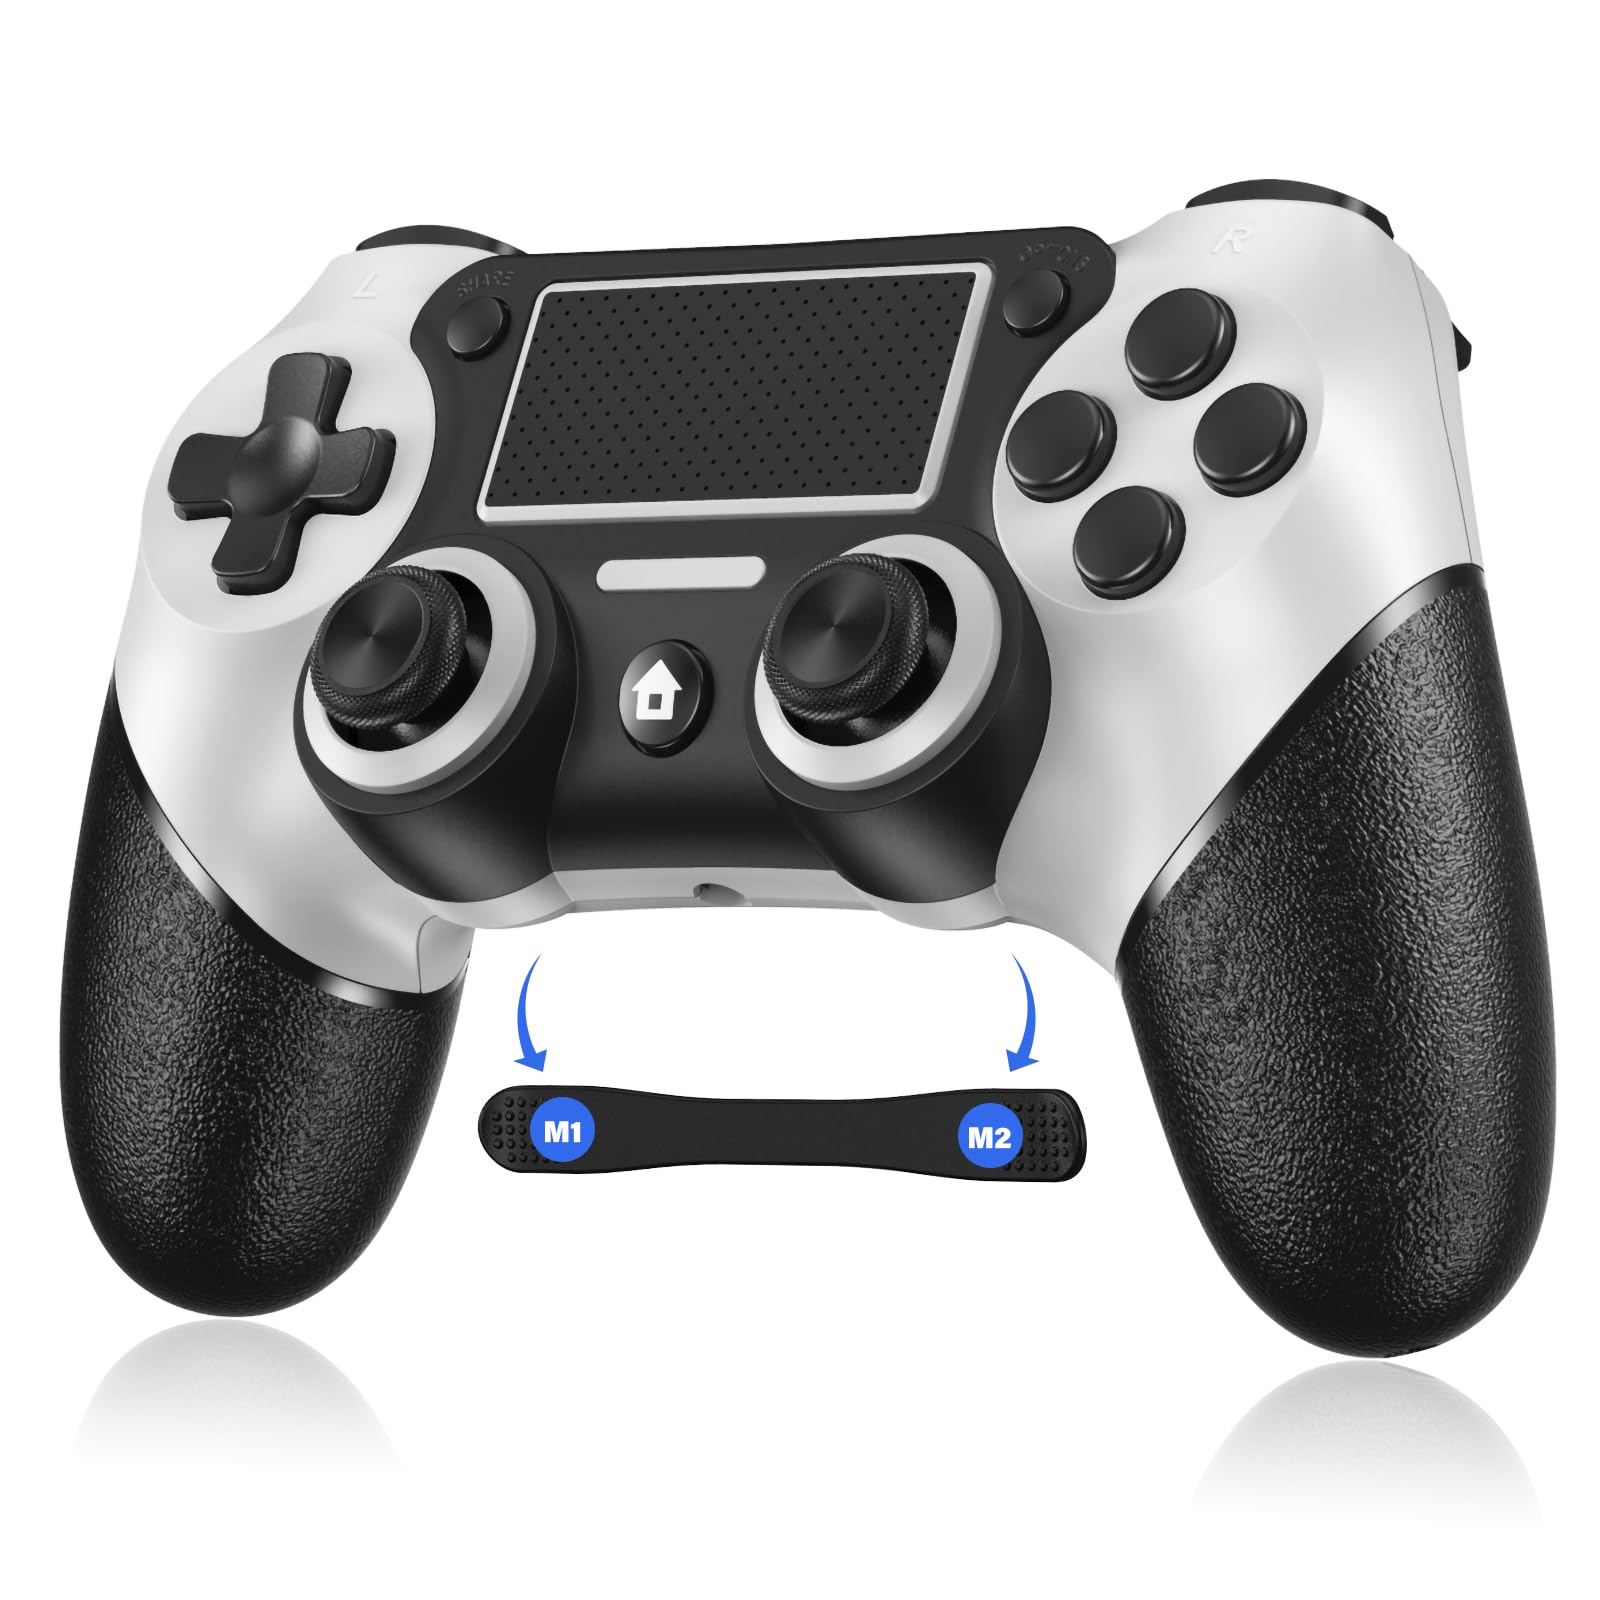 Wireless Game Controller for PS4, Fully Upgrade Sony Playstation 4 Wireless  Controller, Playstation 4 Gamepad Remote with Turbo/Programming and All 